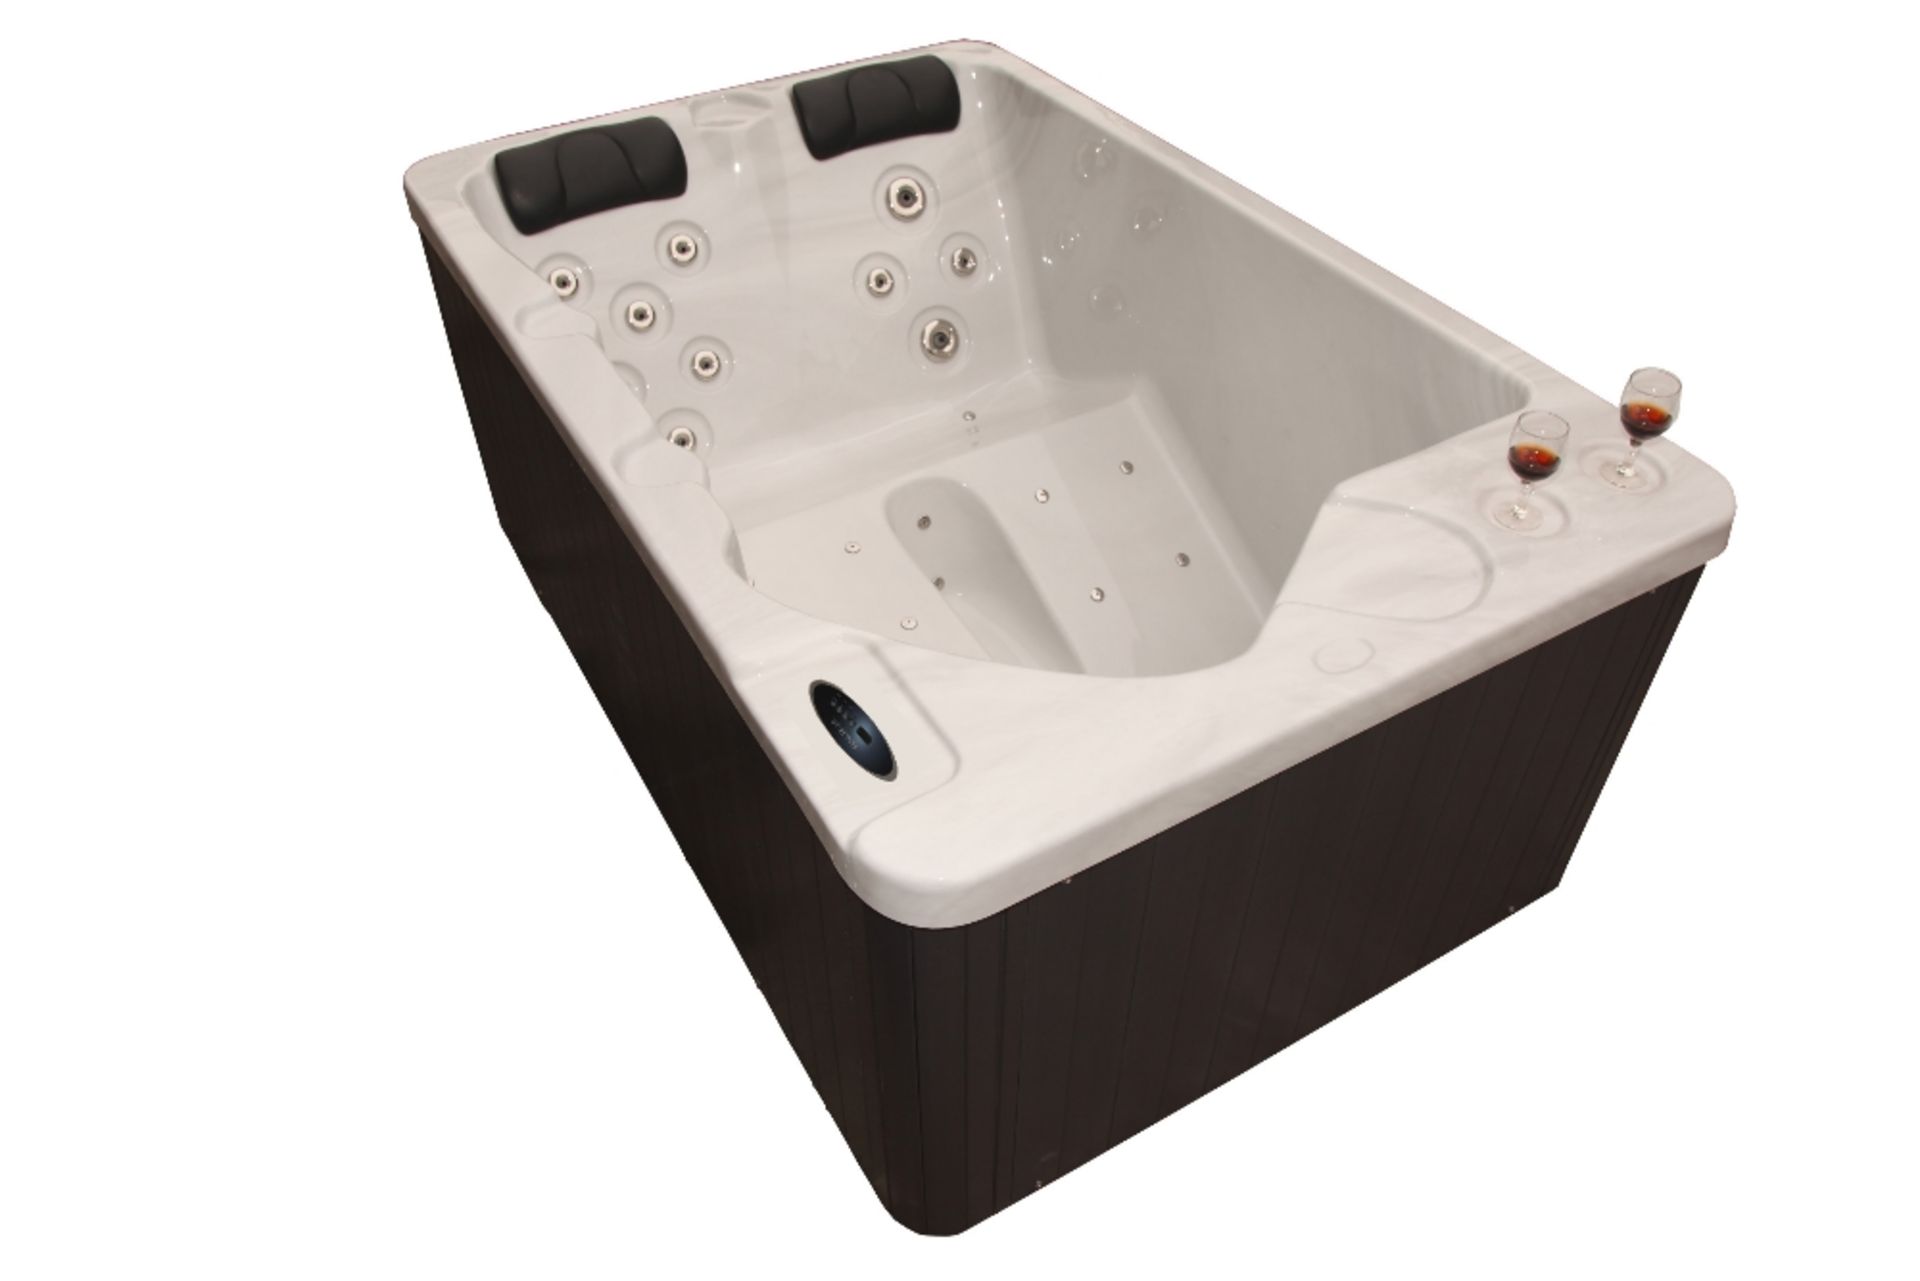 NEW PACKAGED 2016 HOT TUB, MATCHING STEPS, SIDE, INSULATING COVER, TOP USA RUNNING GEAR, USA Balboa - Image 2 of 4